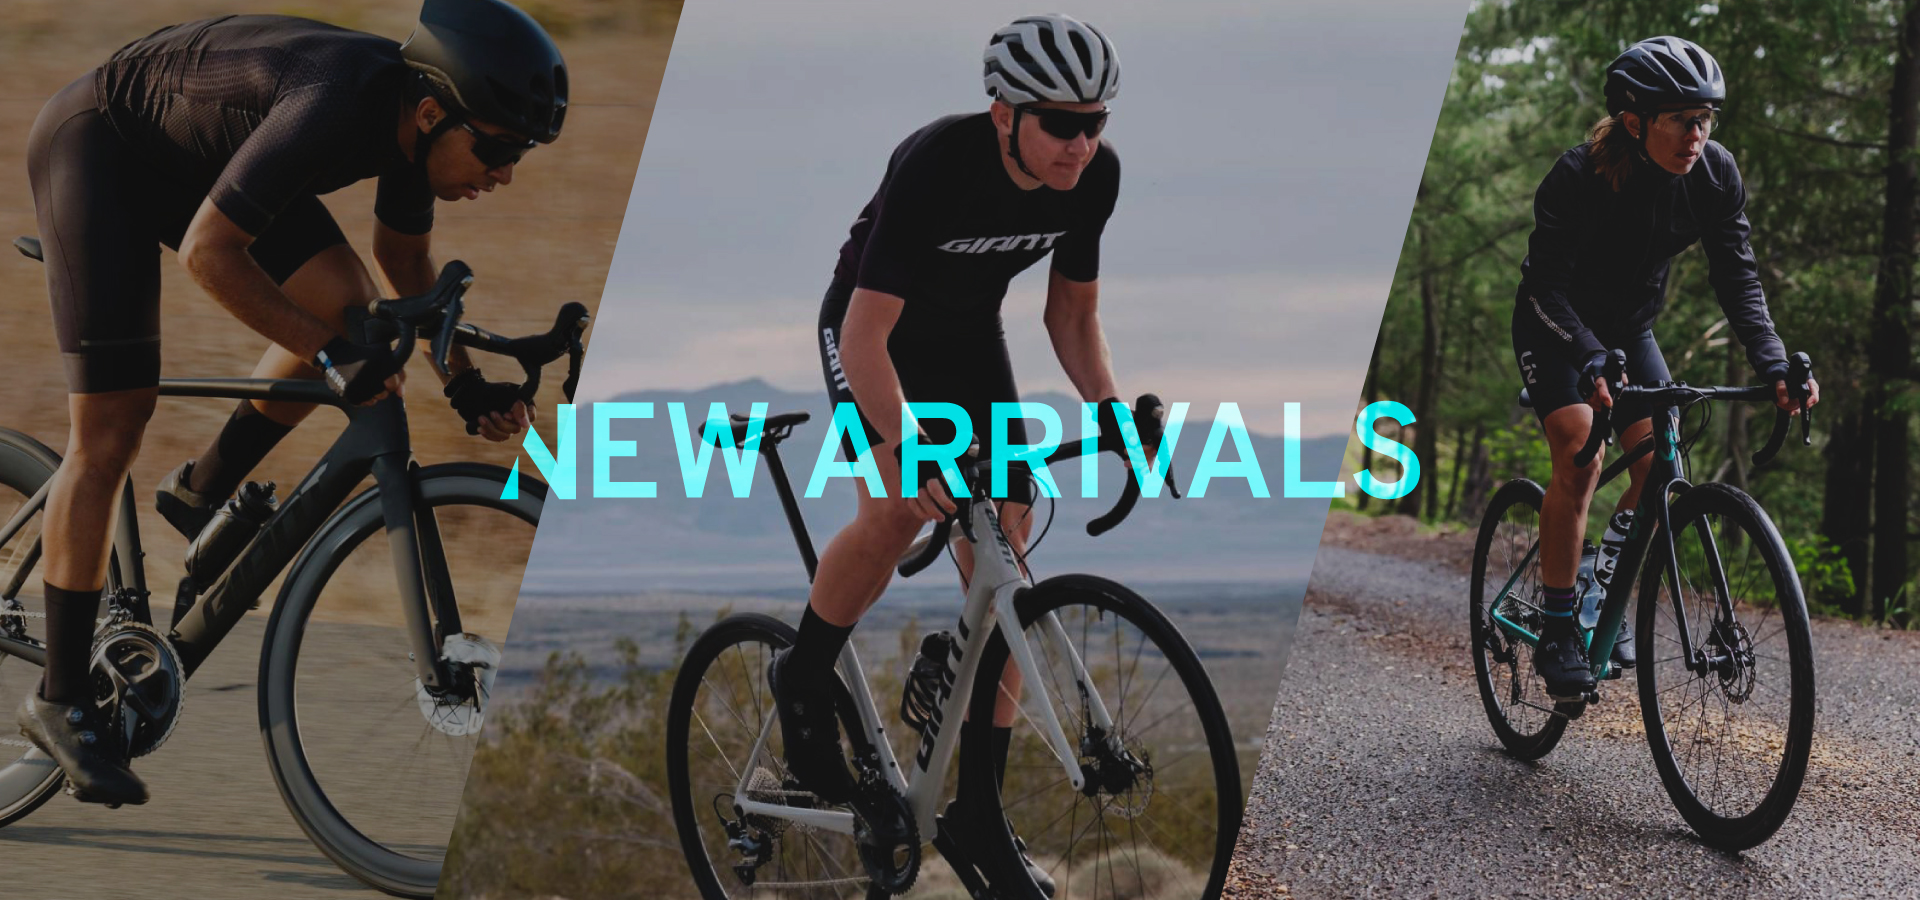 New Arrivals Banner For Giant Bicycles UAE